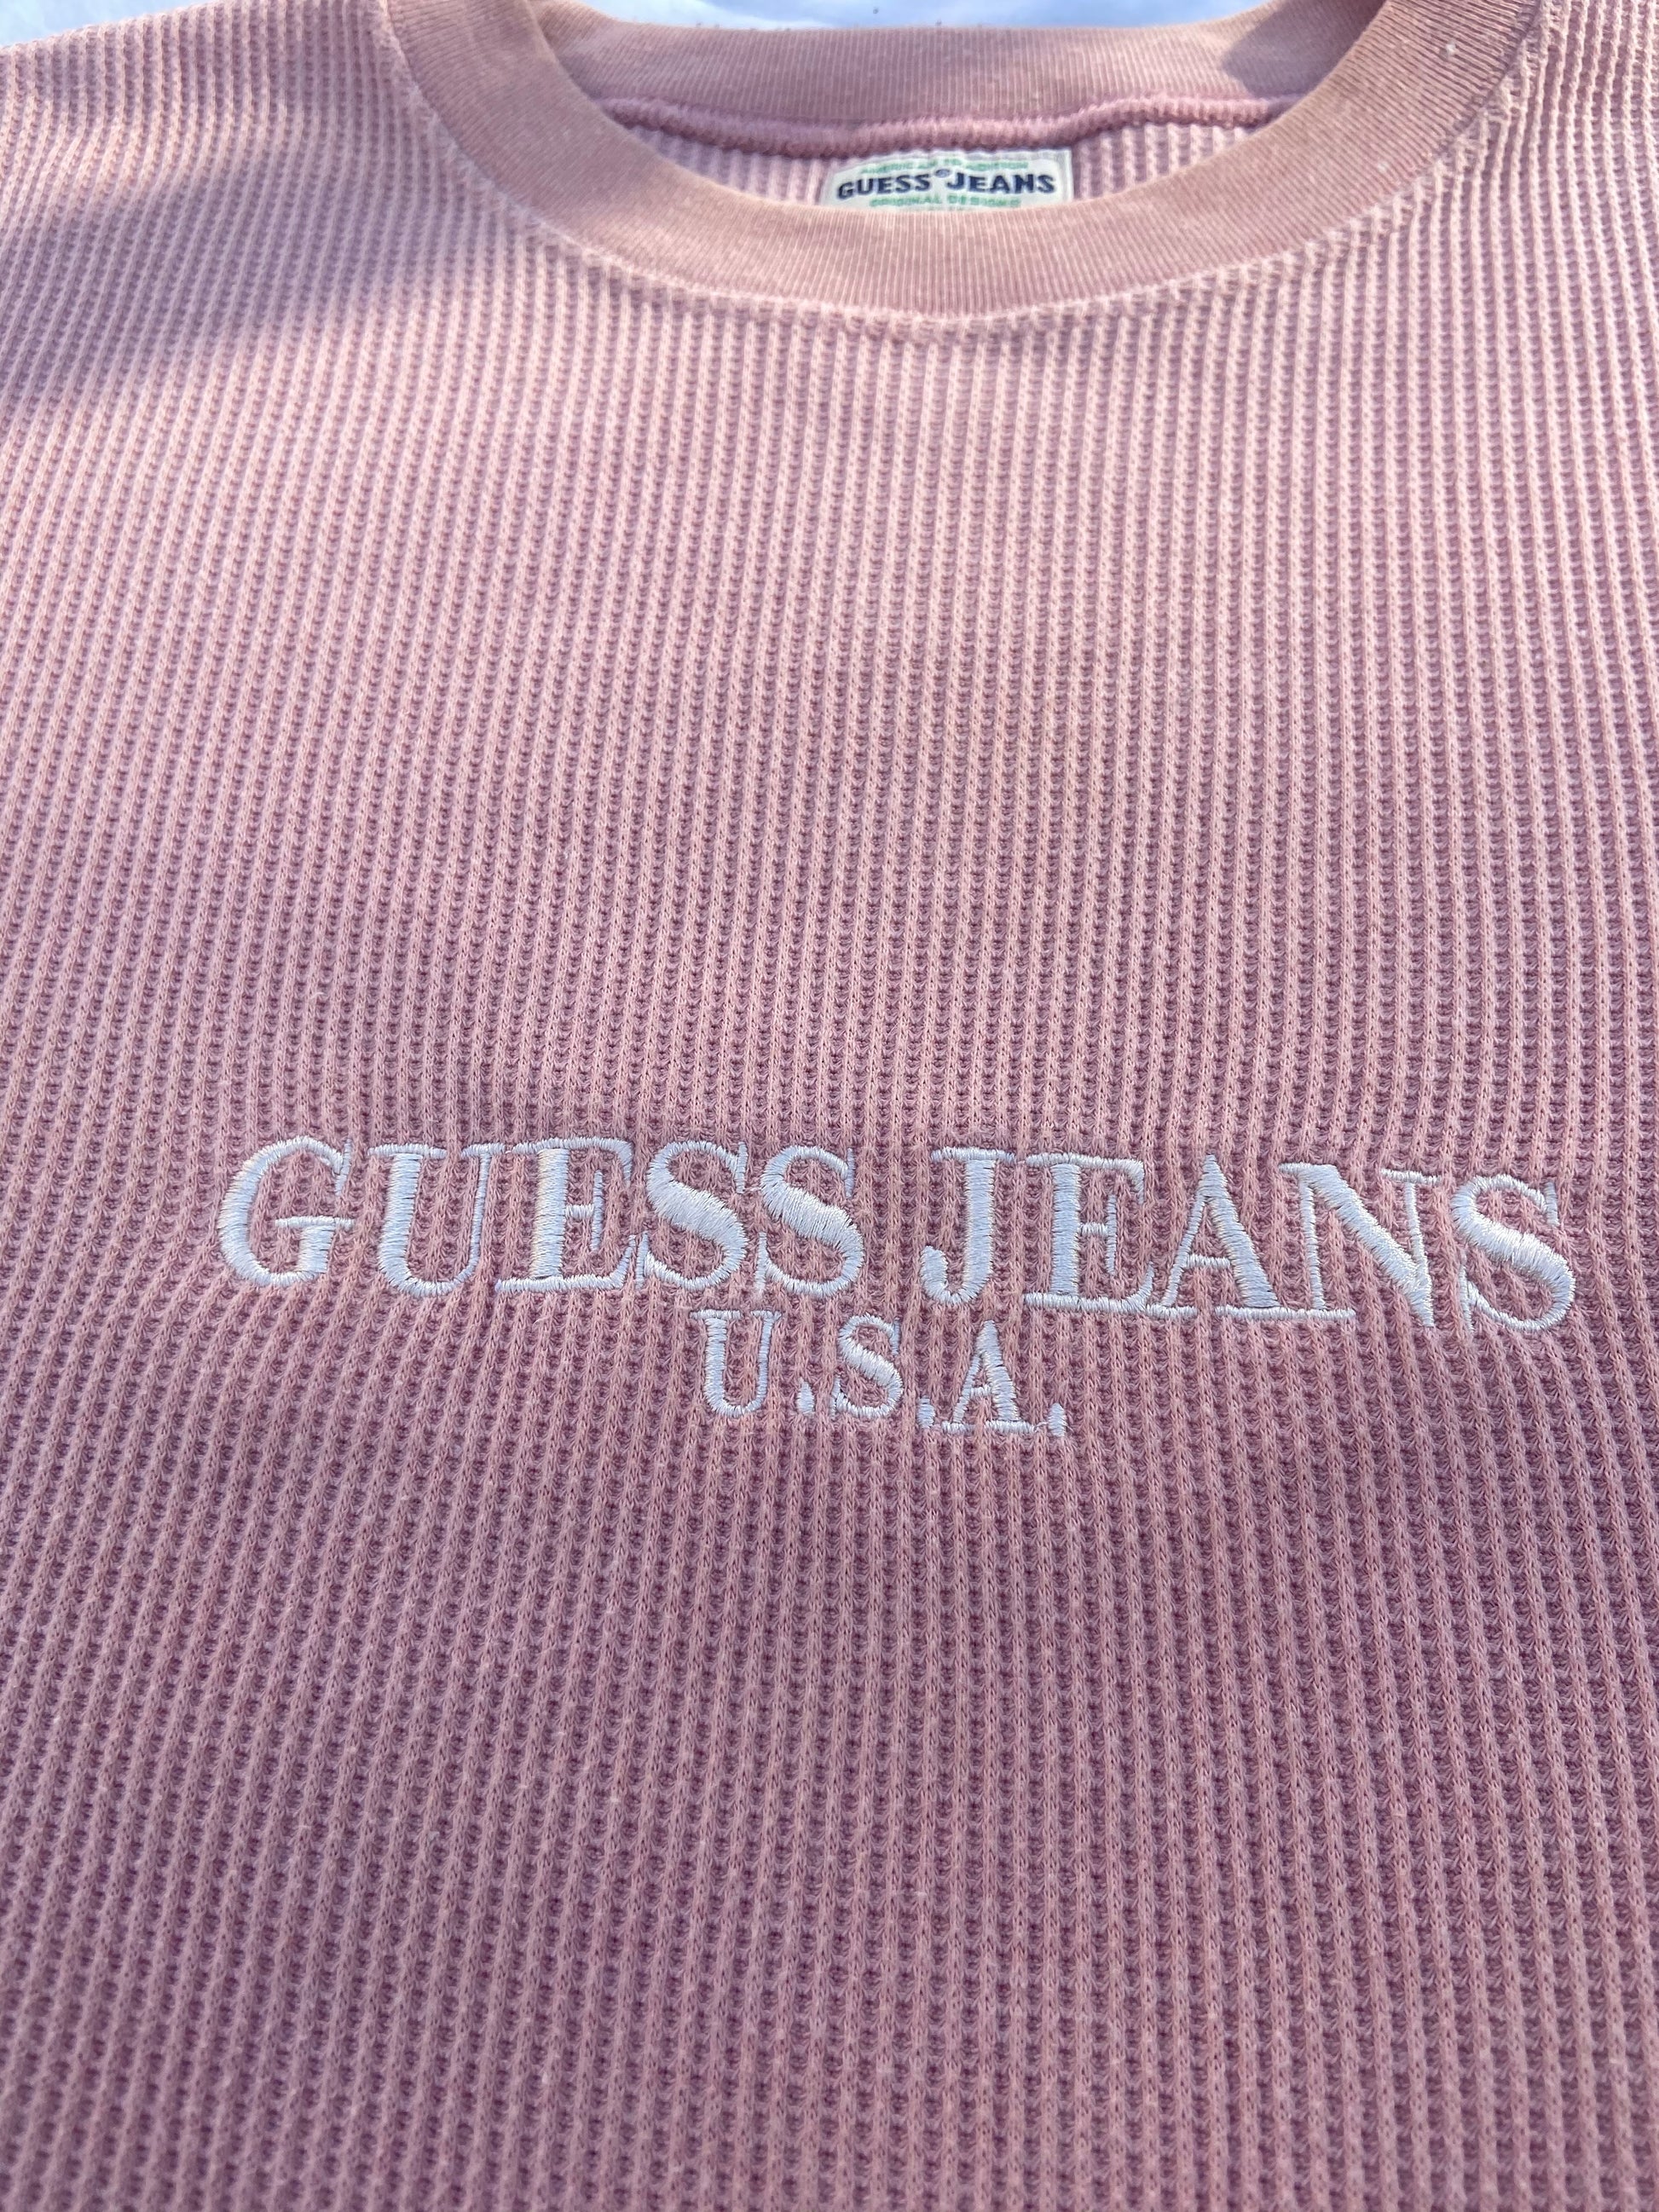 Guess Vintage T-shirt – Ropa Chidx